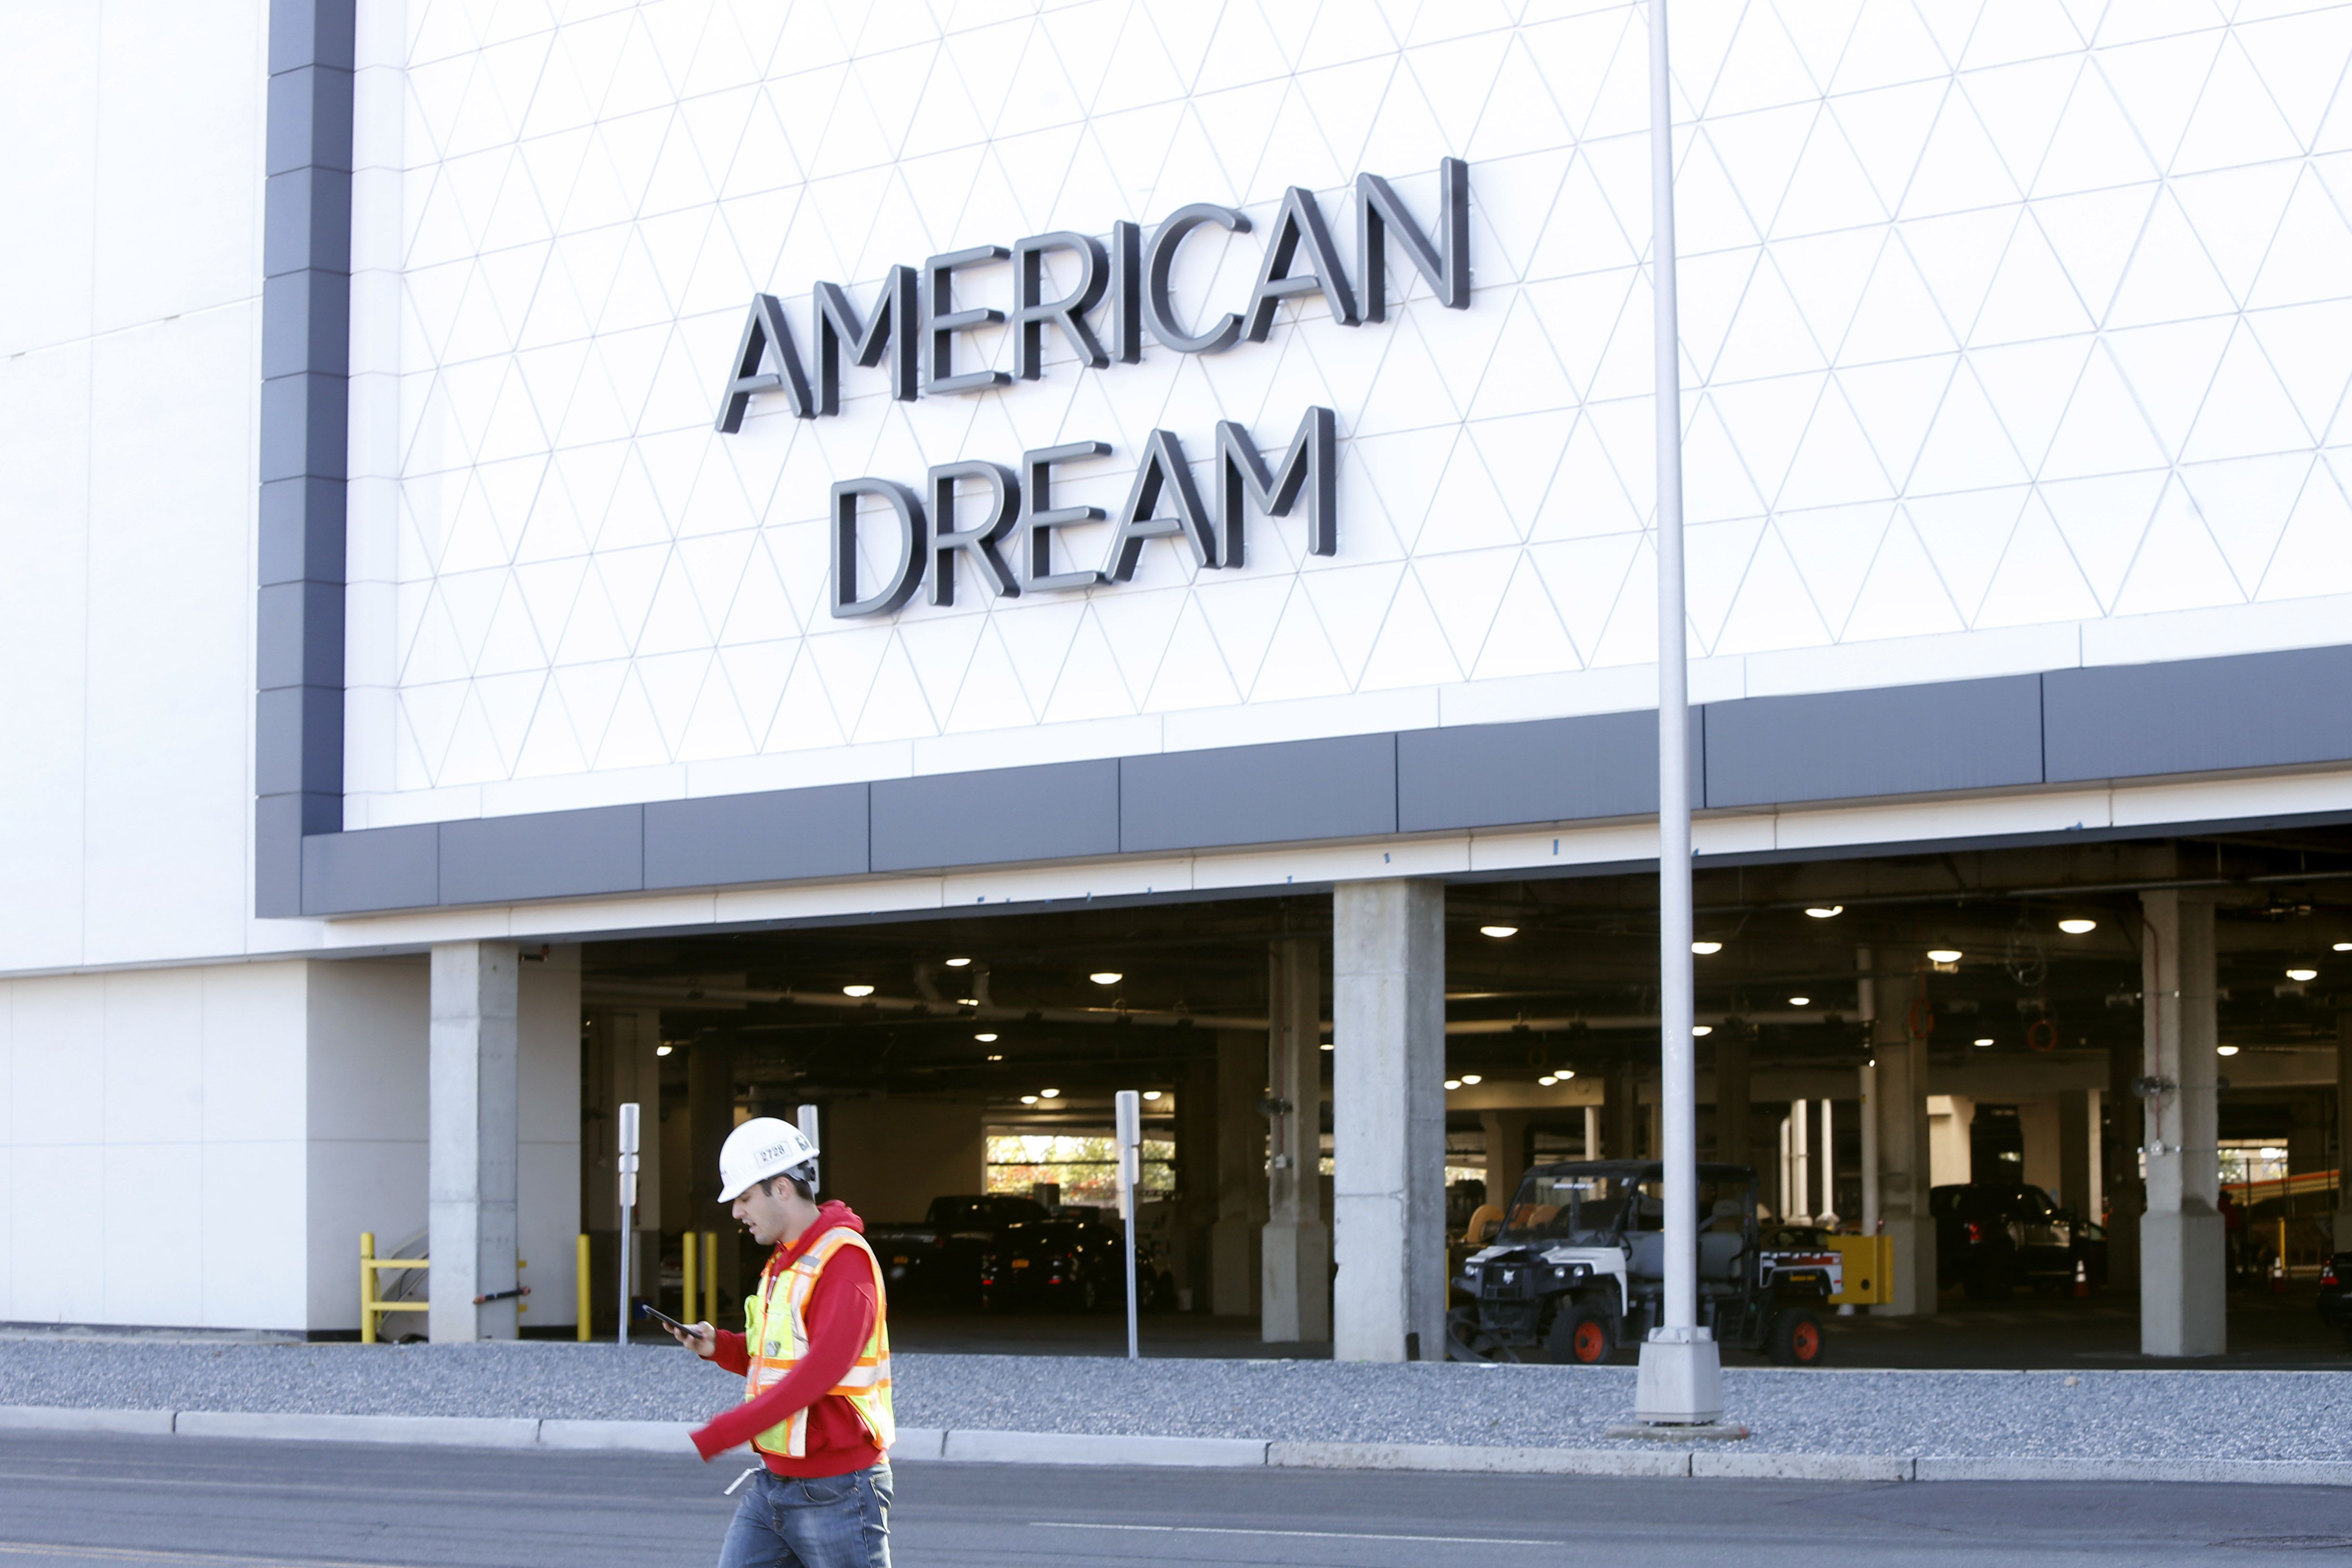 You can't shop at New Jersey's American Dream on Sundays. Here's why